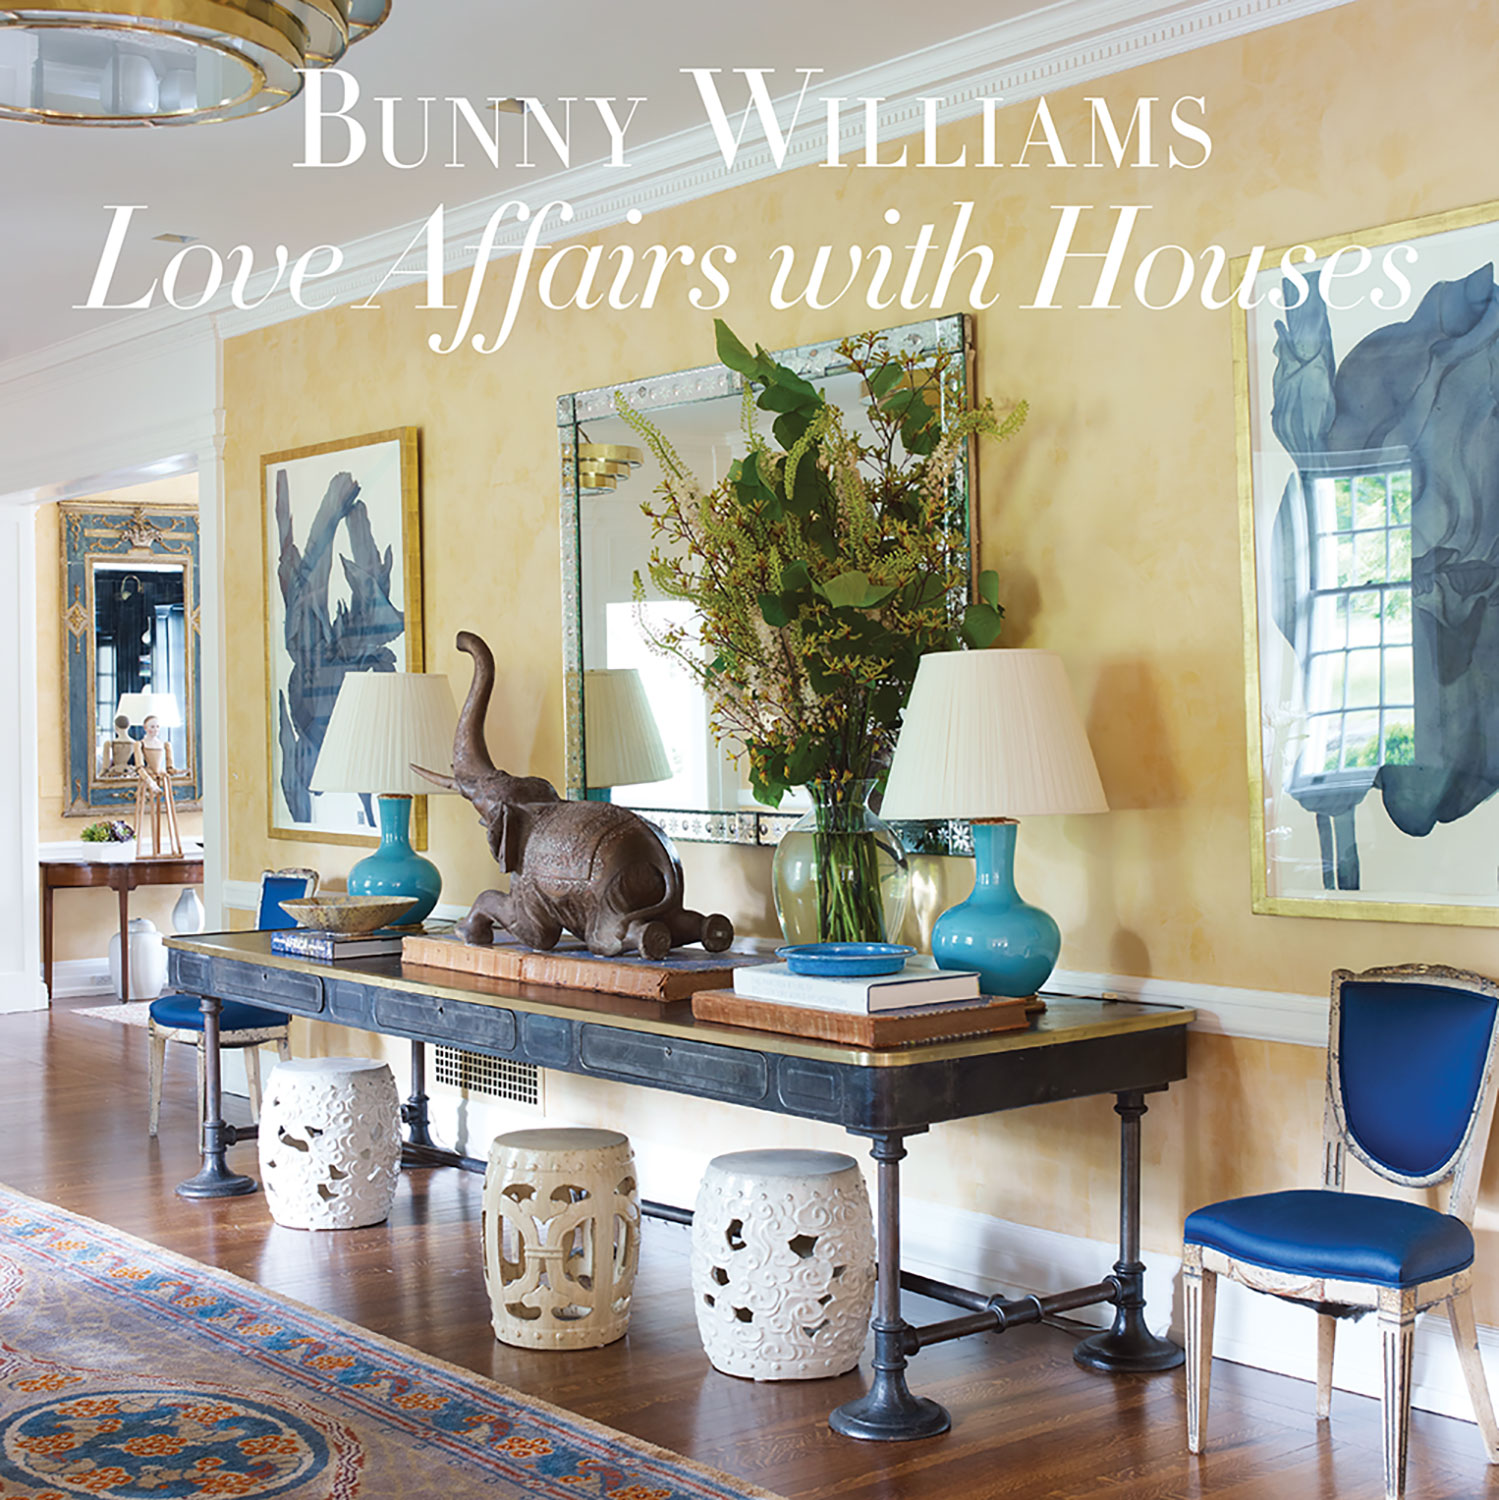 Bunny Williams, Love Affairs with Houses